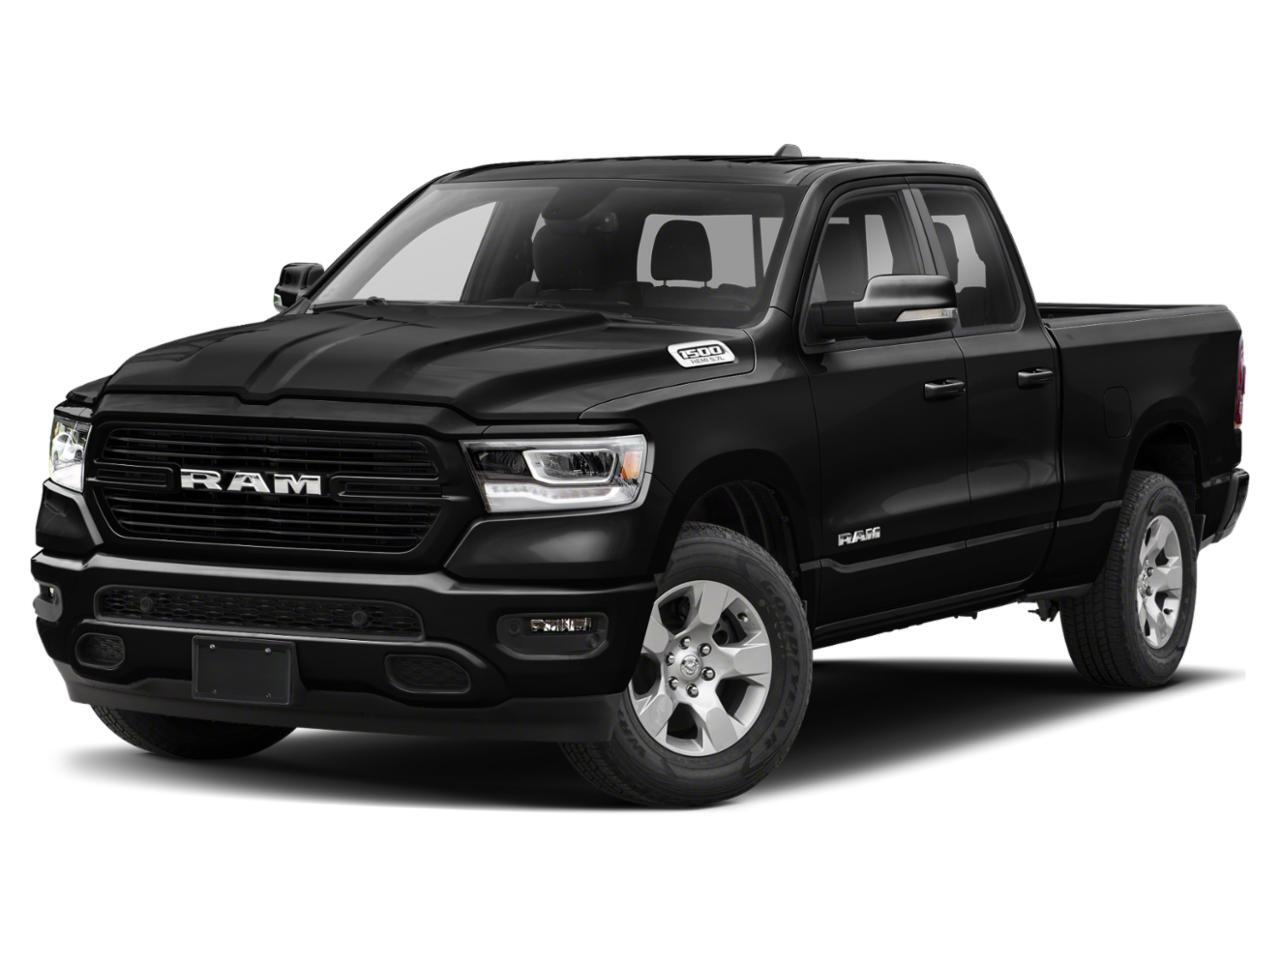 2019 Ram 1500 TRADESMAN SXT IN DIAMOND BLACK EQUIPPED WITH A 5.7